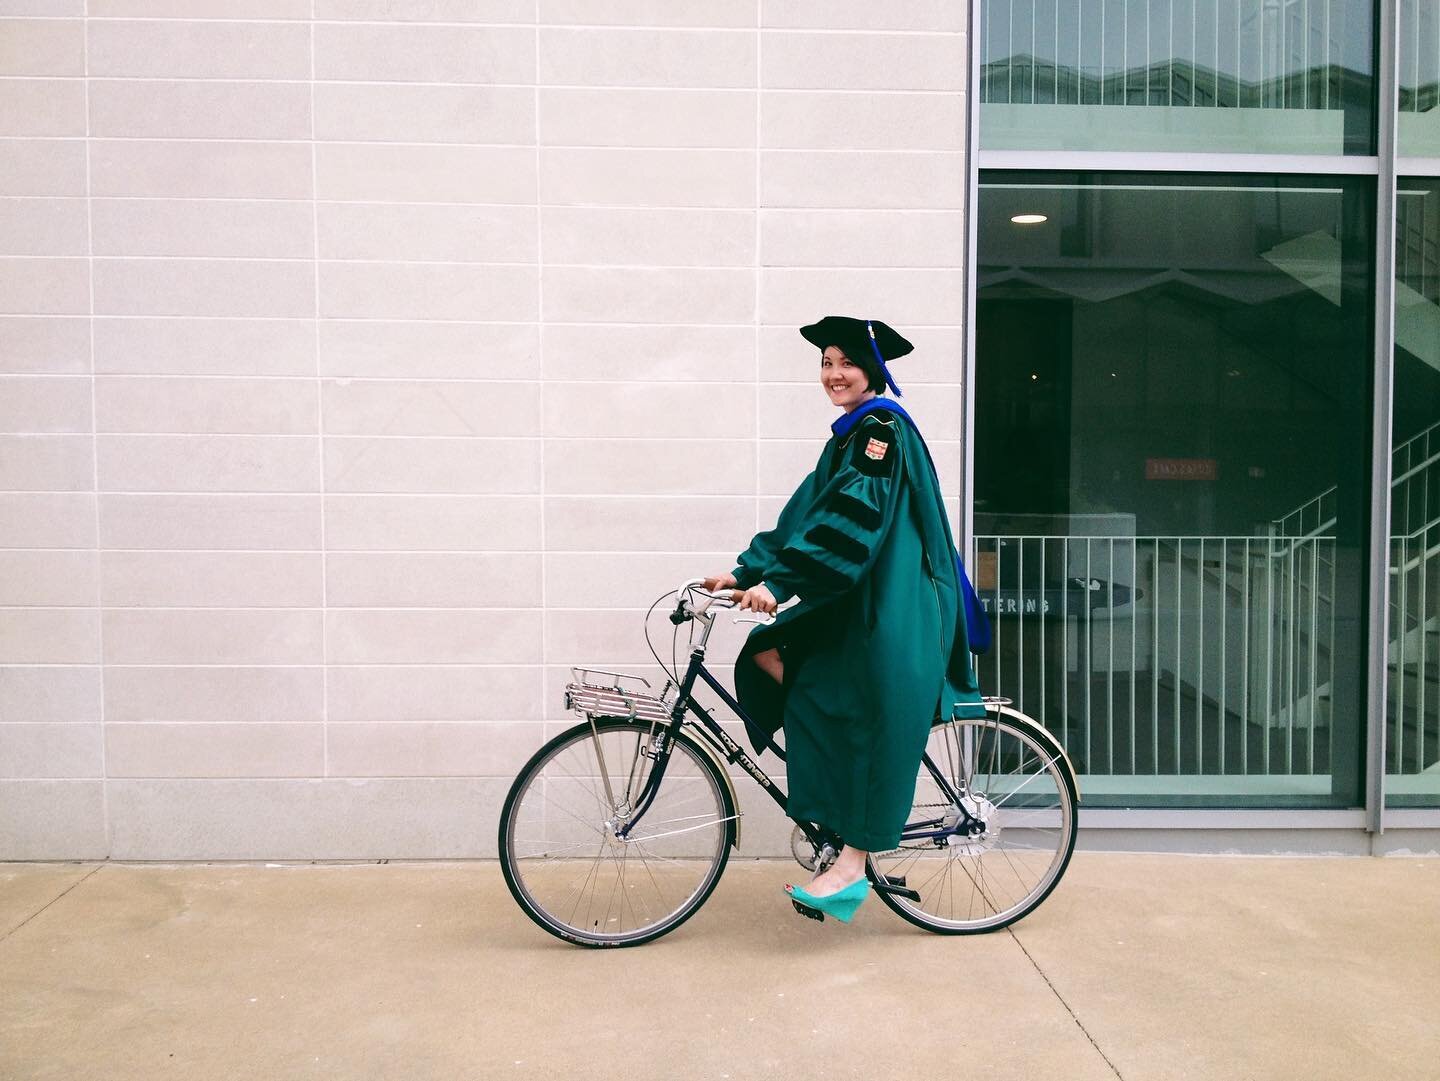 TEN YEARS AGO today, I got a new bike, a funny hat, and three new letters behind my name.

When you&rsquo;re in graduate school, it&rsquo;s easy to imagine that simply &ldquo;getting&rdquo; the PhD is the final mark of achievement and maybe even the 